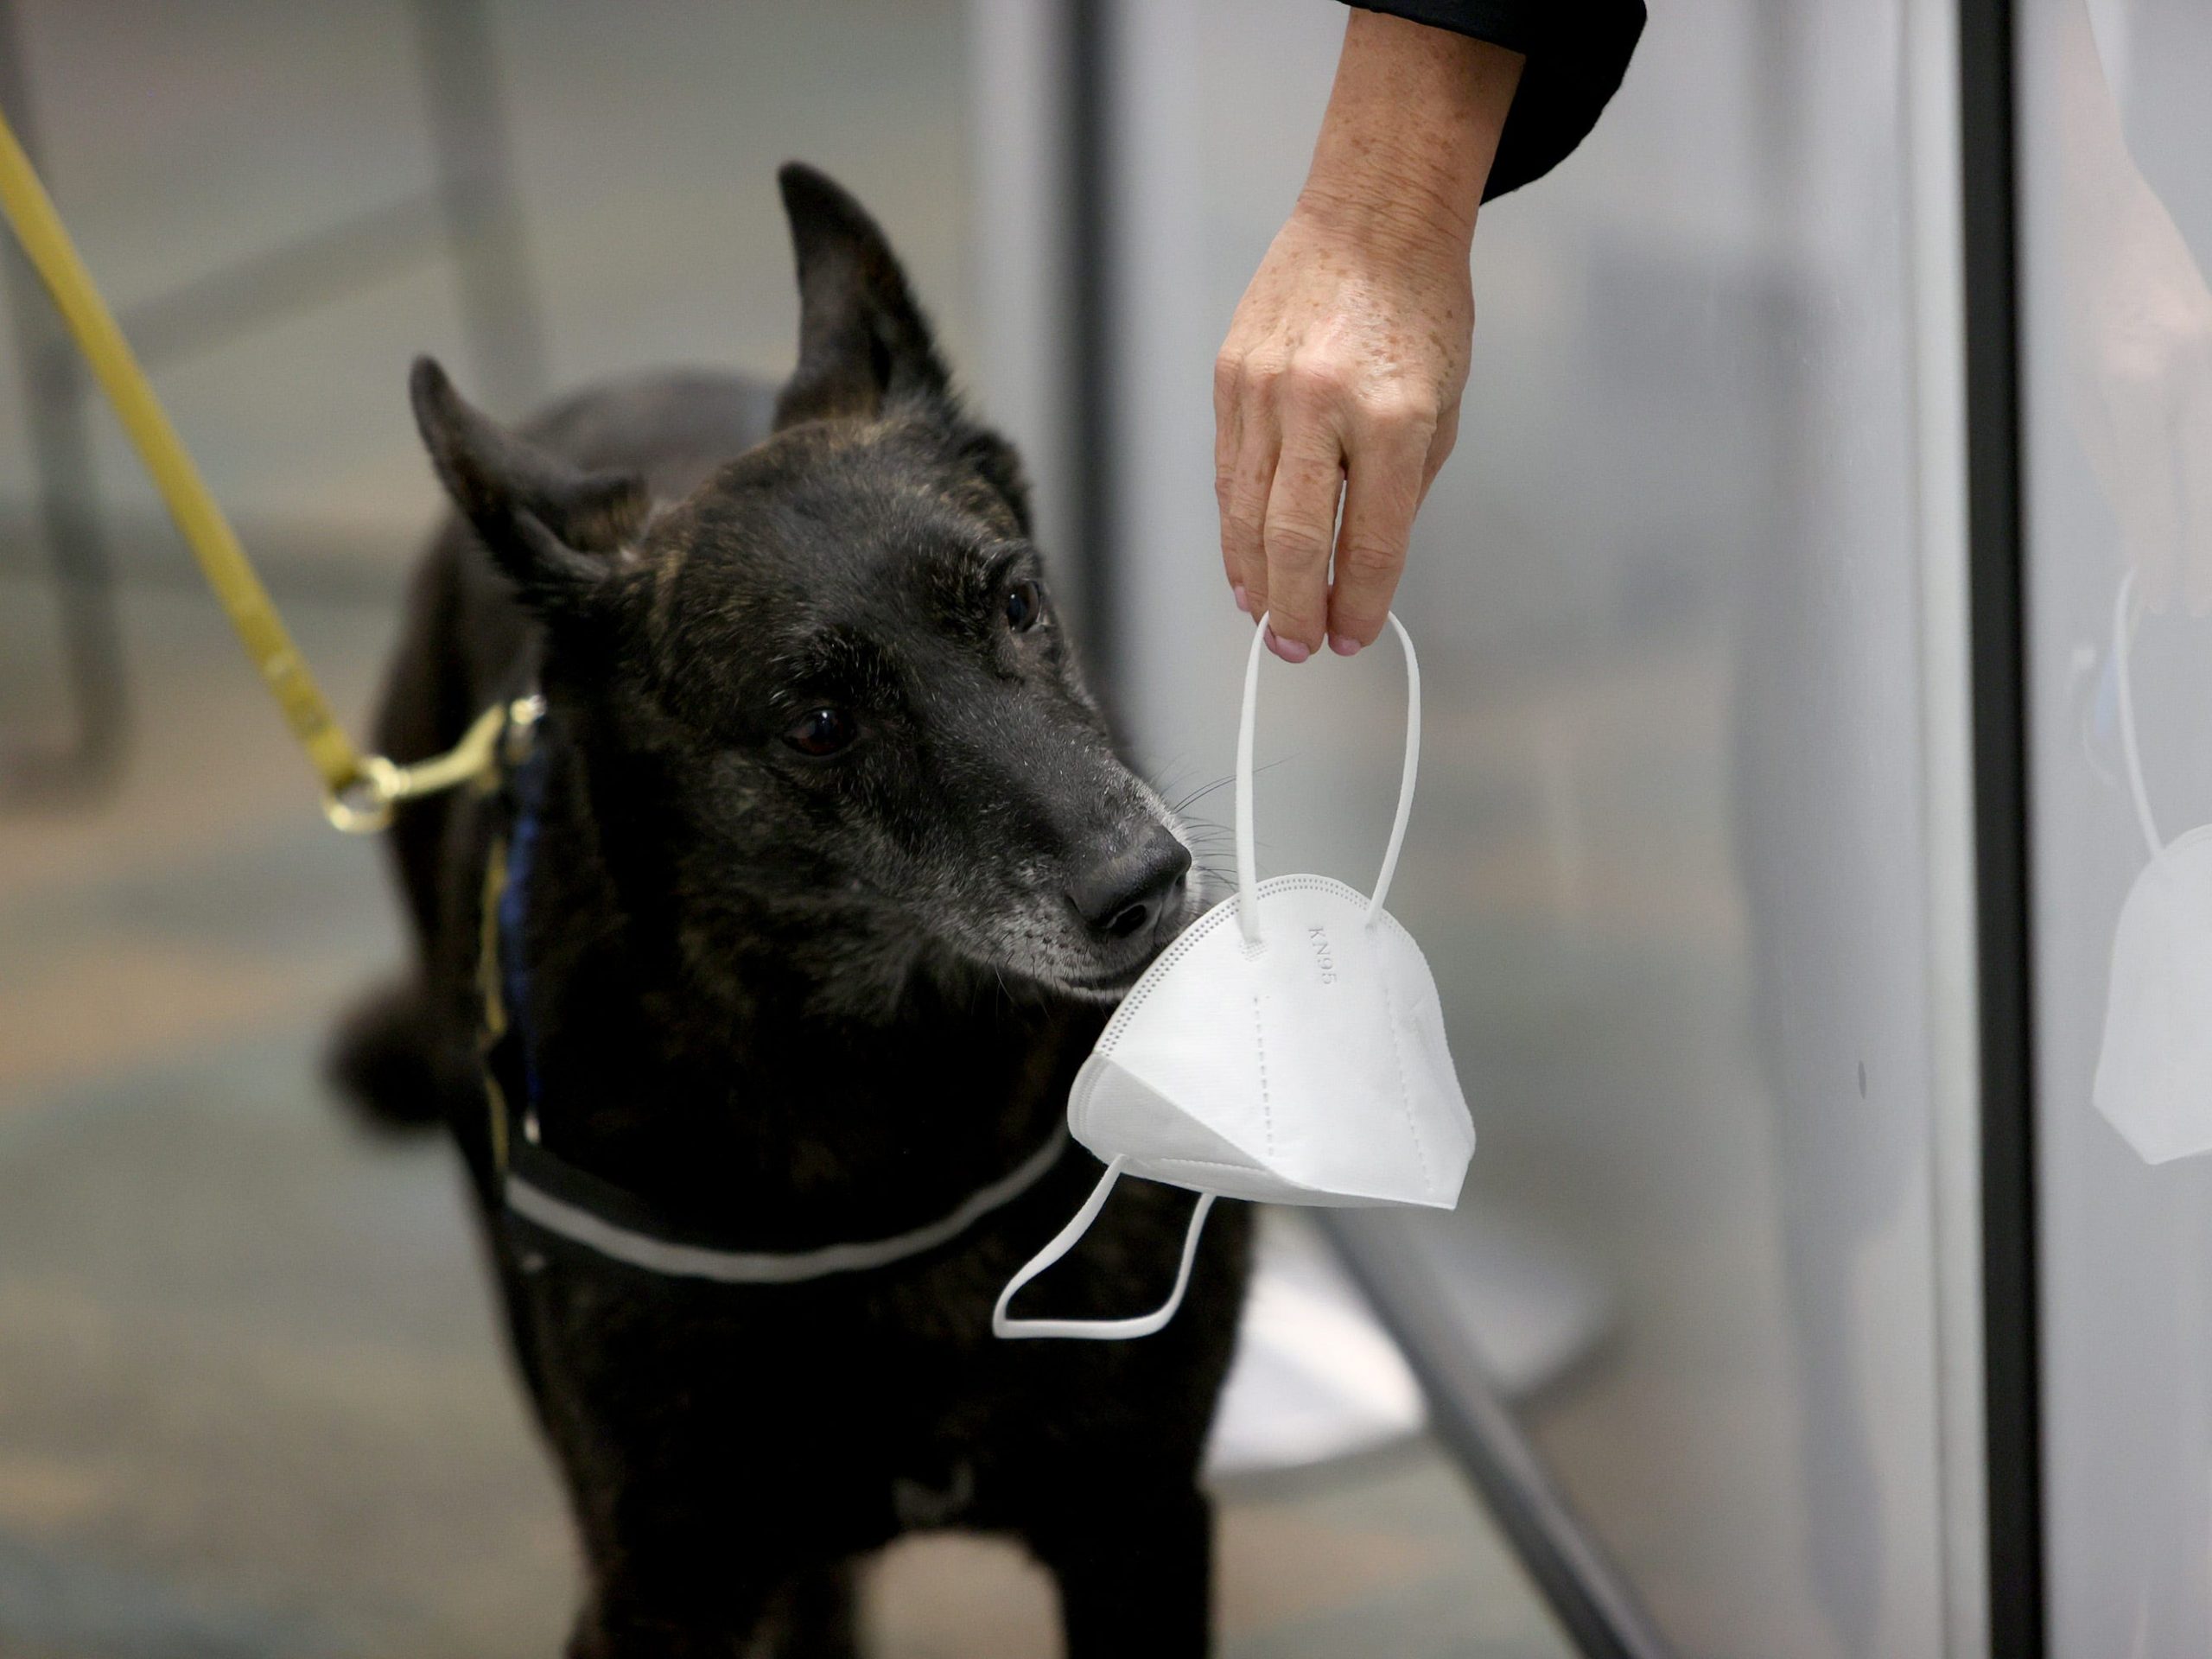 One Betta, a Dutch Shepard, sniffs a mask for the scent of COVID-19 at Miami International Airport on September 08, 2021 in Miami, Florida.